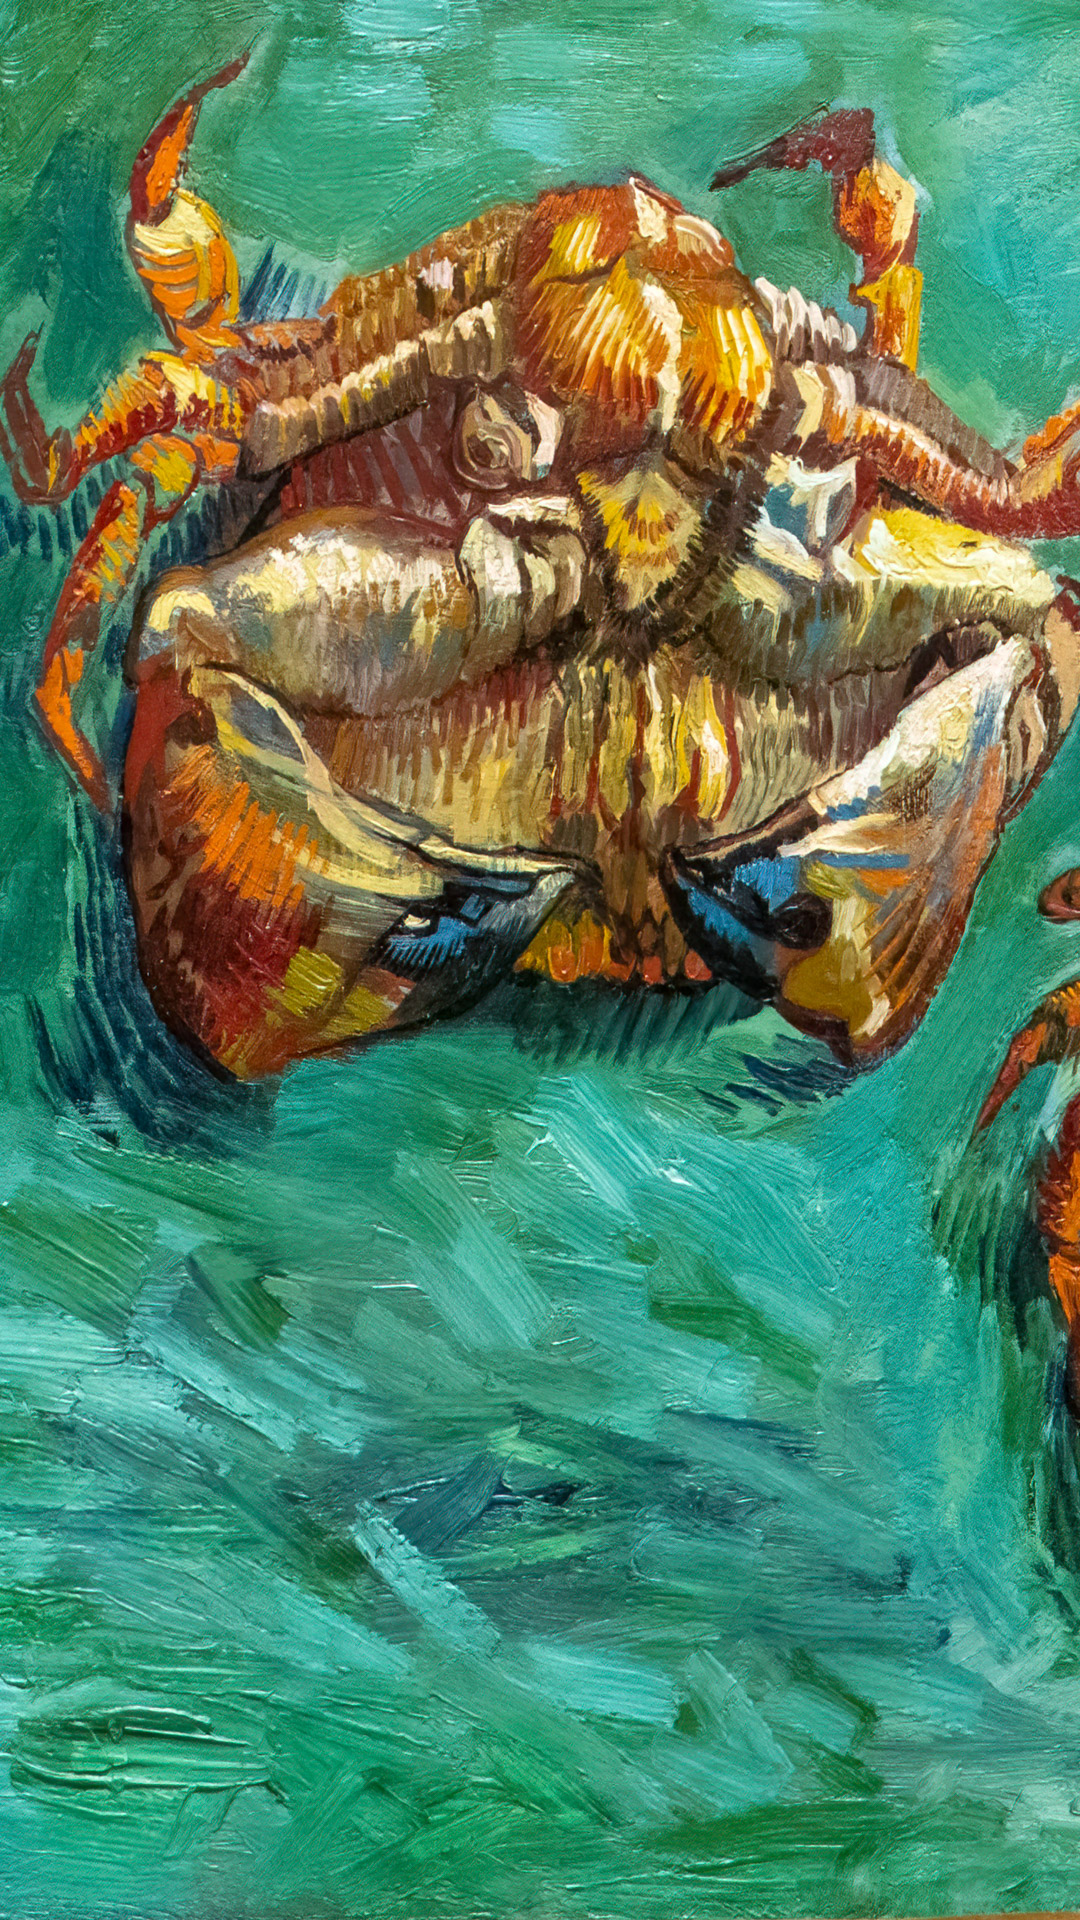 Enhance your screens with the vivid vitality of Two Crabs, a Van Gogh impressionism iphone wallpaper that brings marine life's intricacies to life.